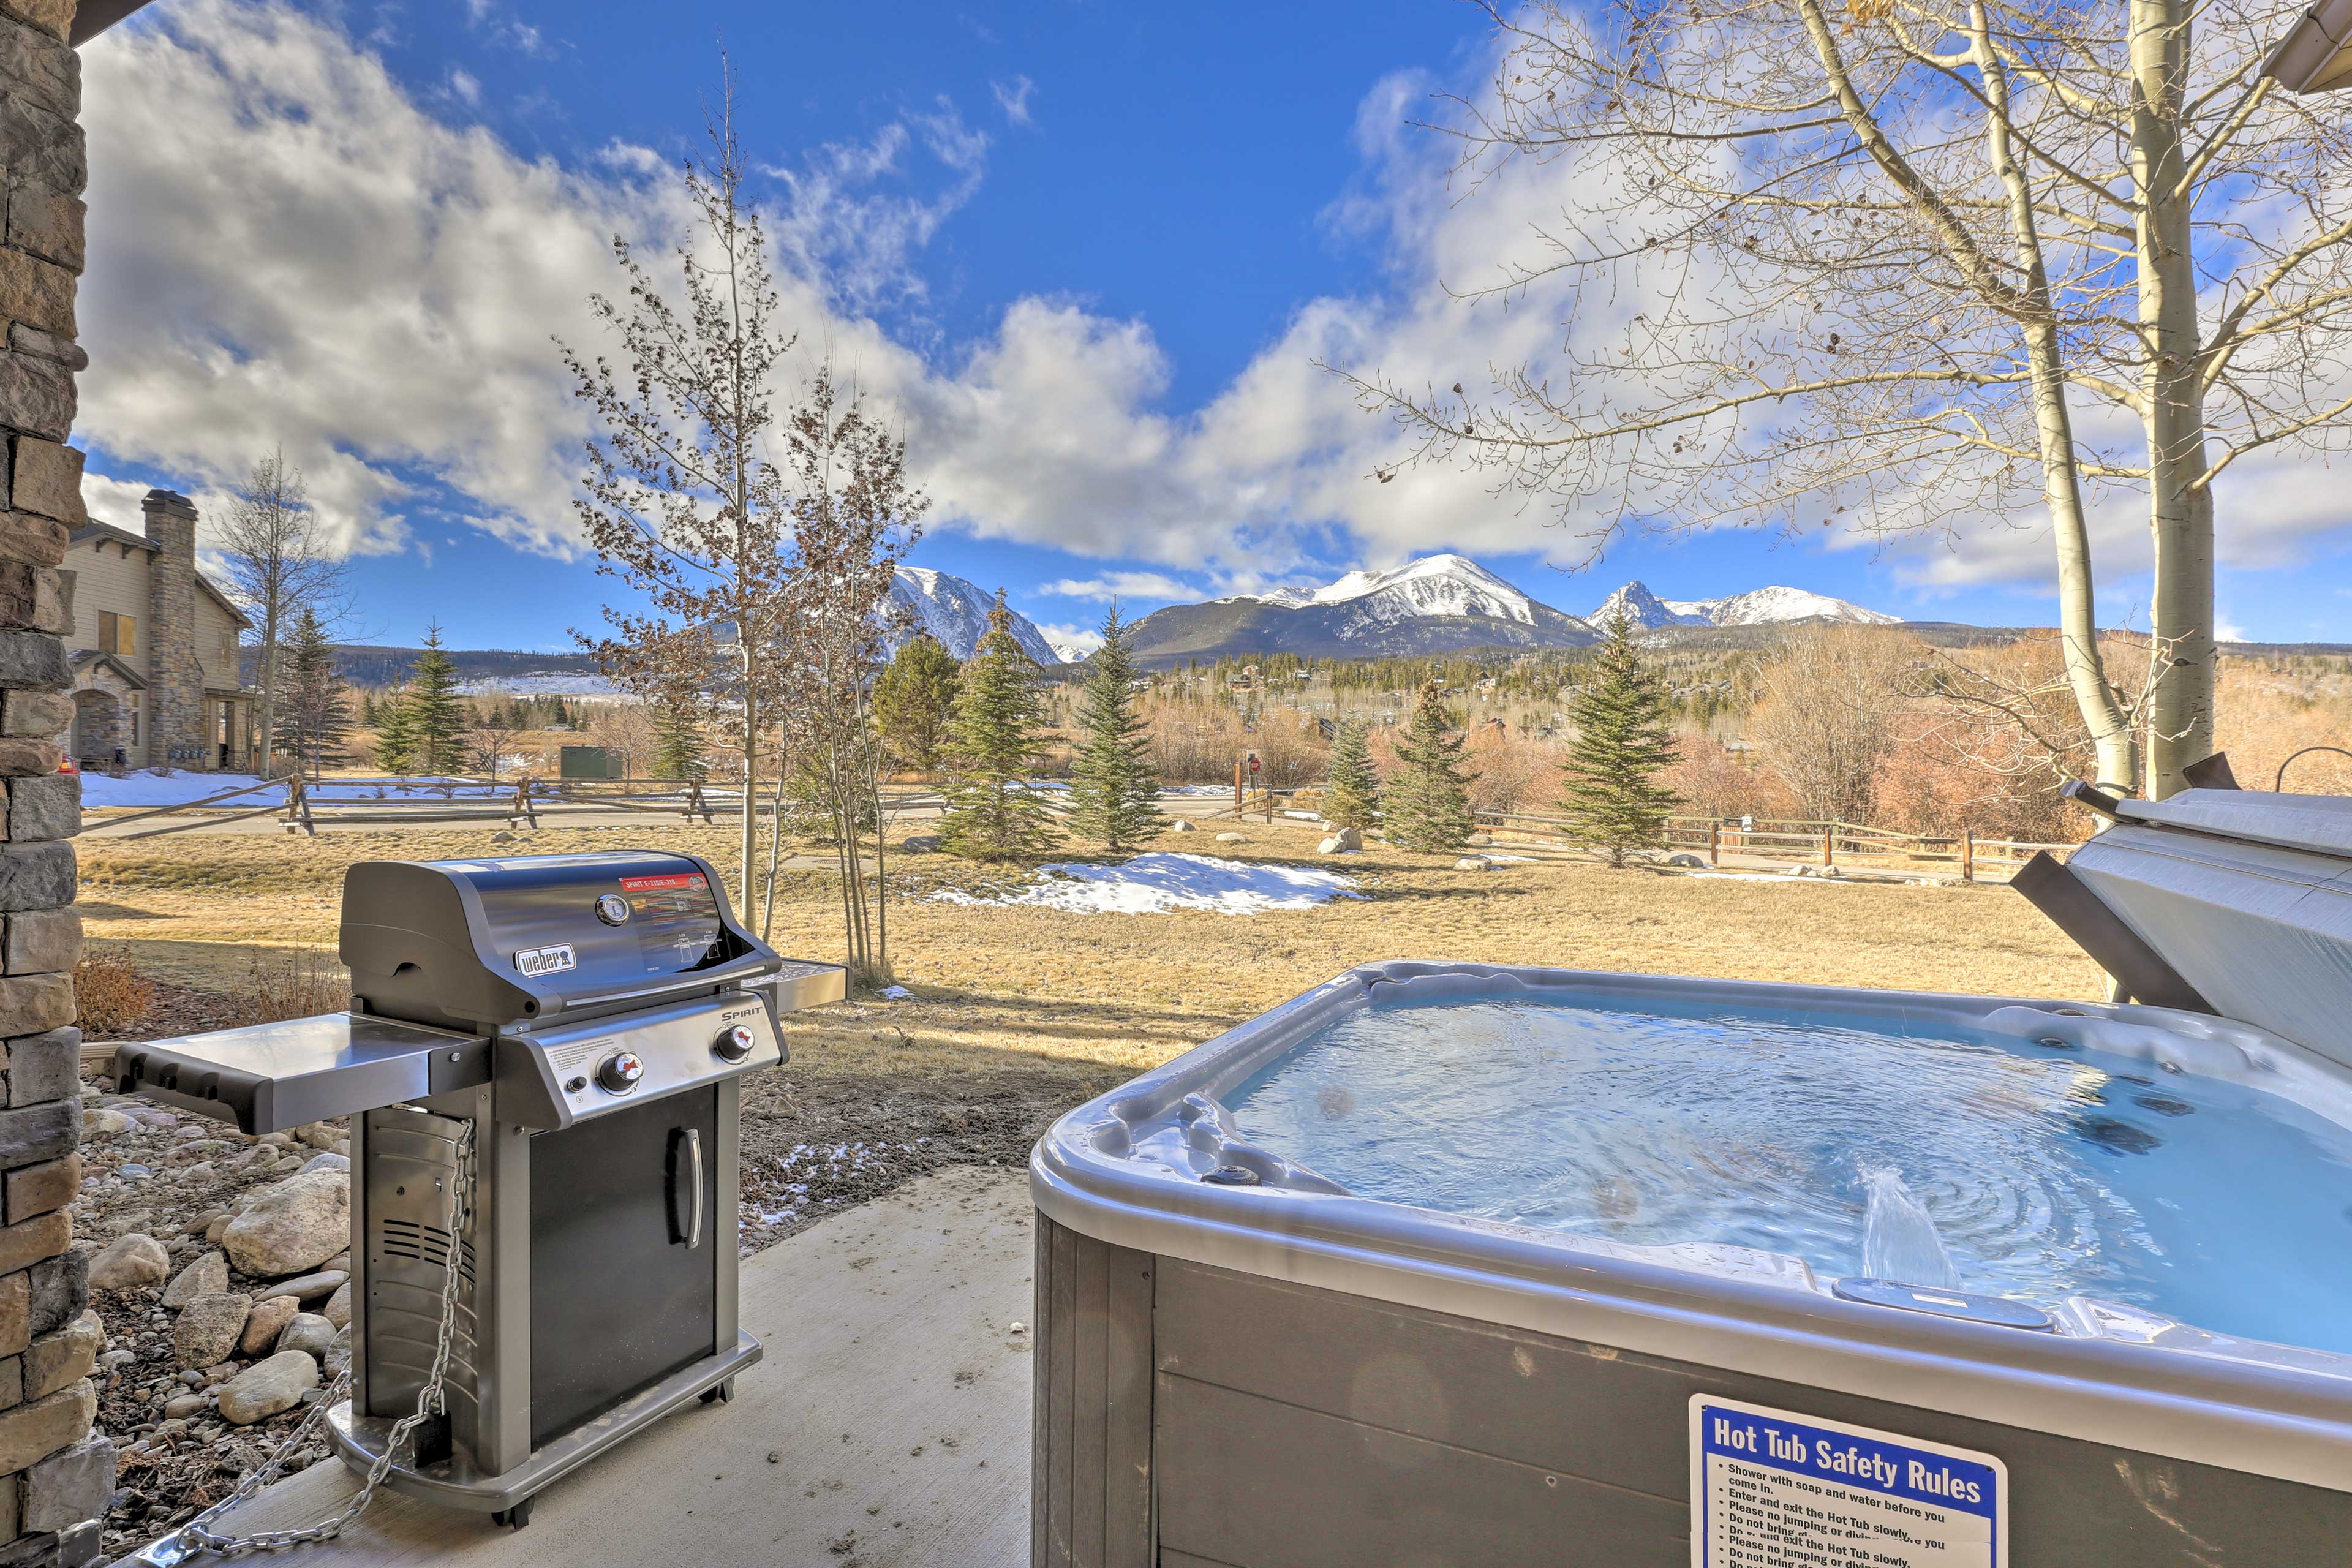 Soak in the private hot tub that is offered at this vacation rental.